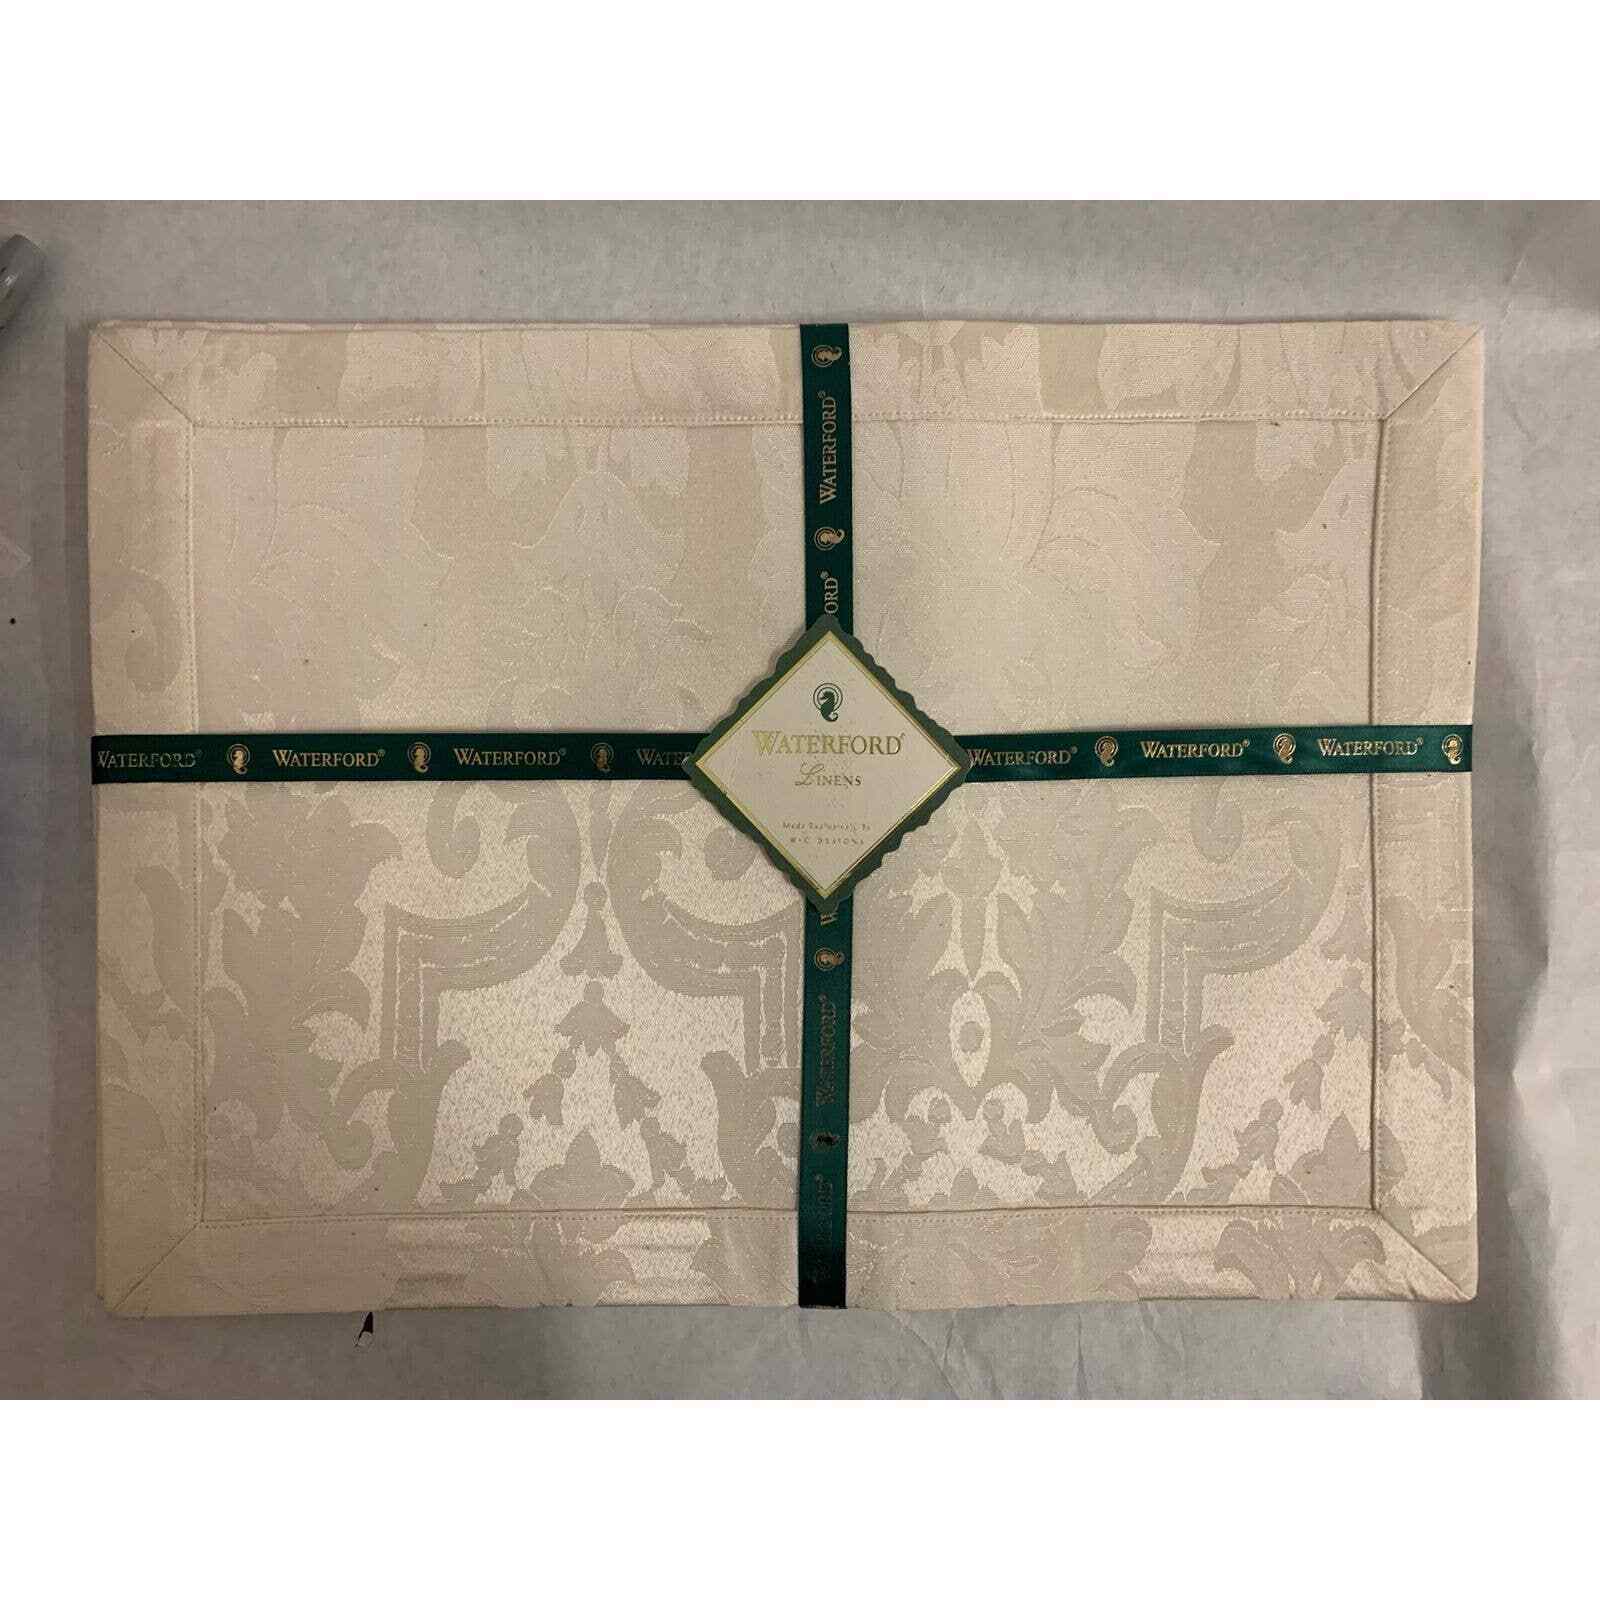 NIP Waterford Placemats in plastic, Ardmore, 18.5" x 13", Champagne, Set of 4 - $24.74